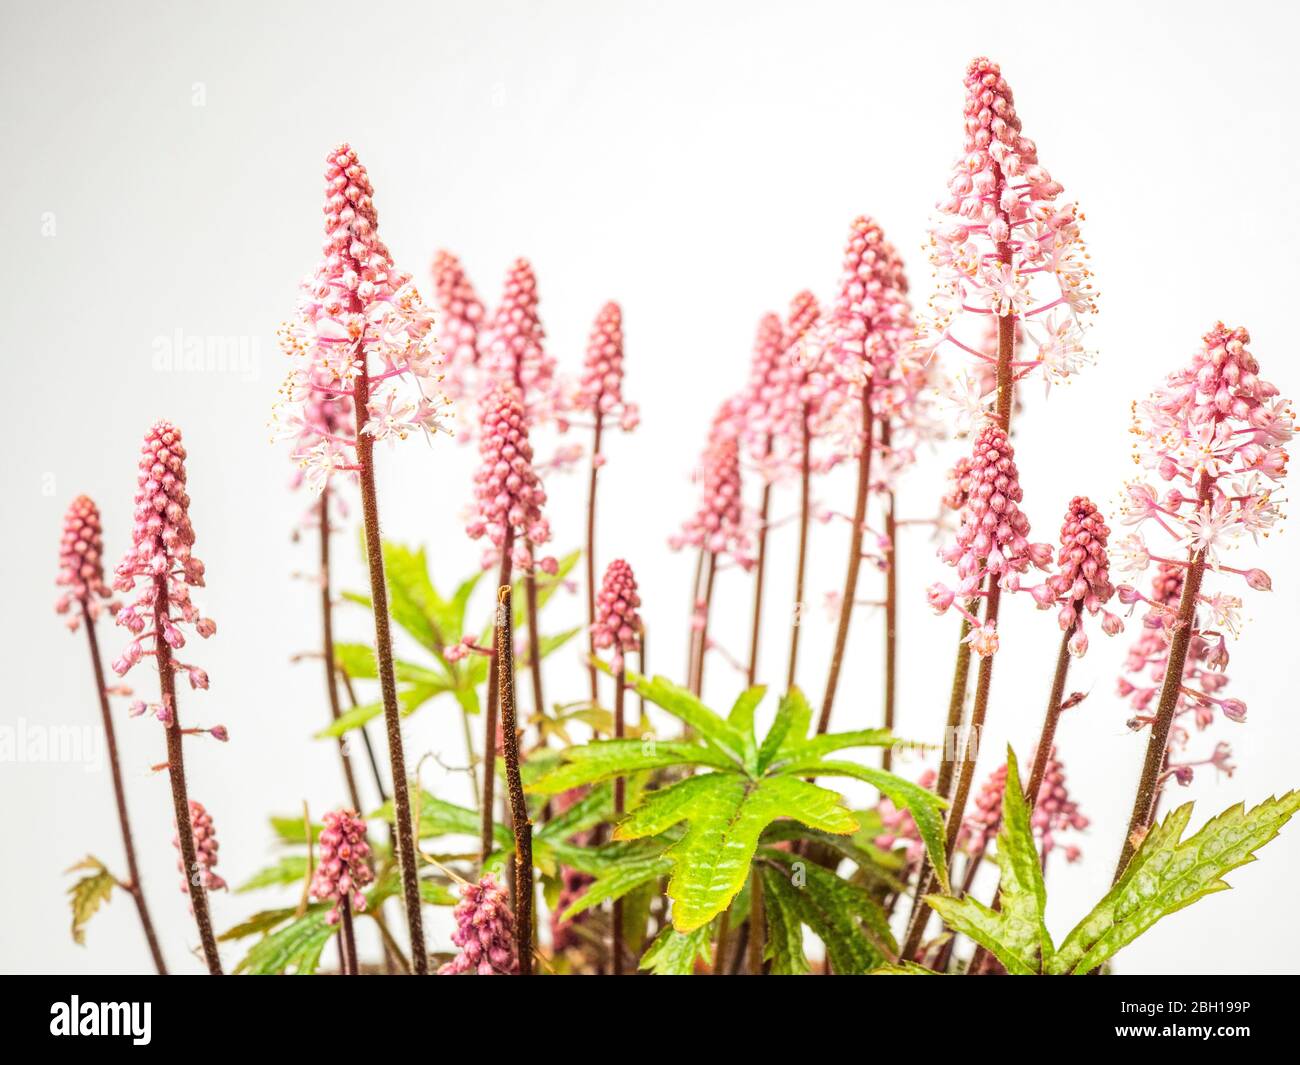 Tiarella Pink Skyrocket flowers against a white background Stock Photo